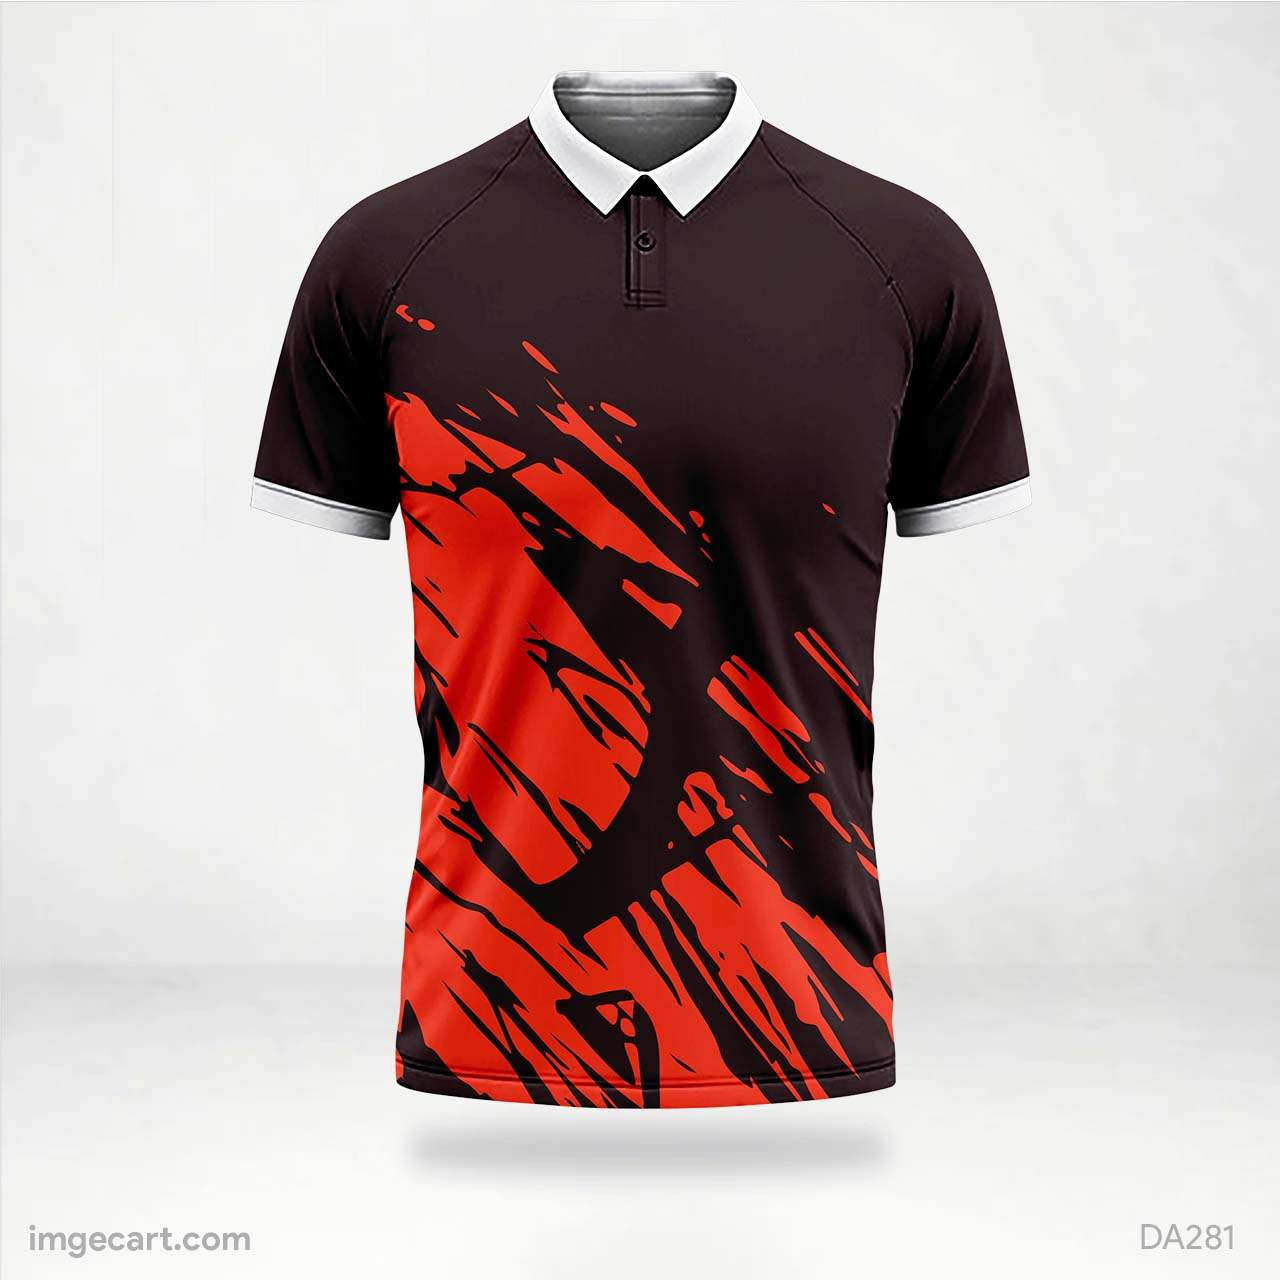 Cricket jersey Brown with Red Pattern Sublimation - imgecart